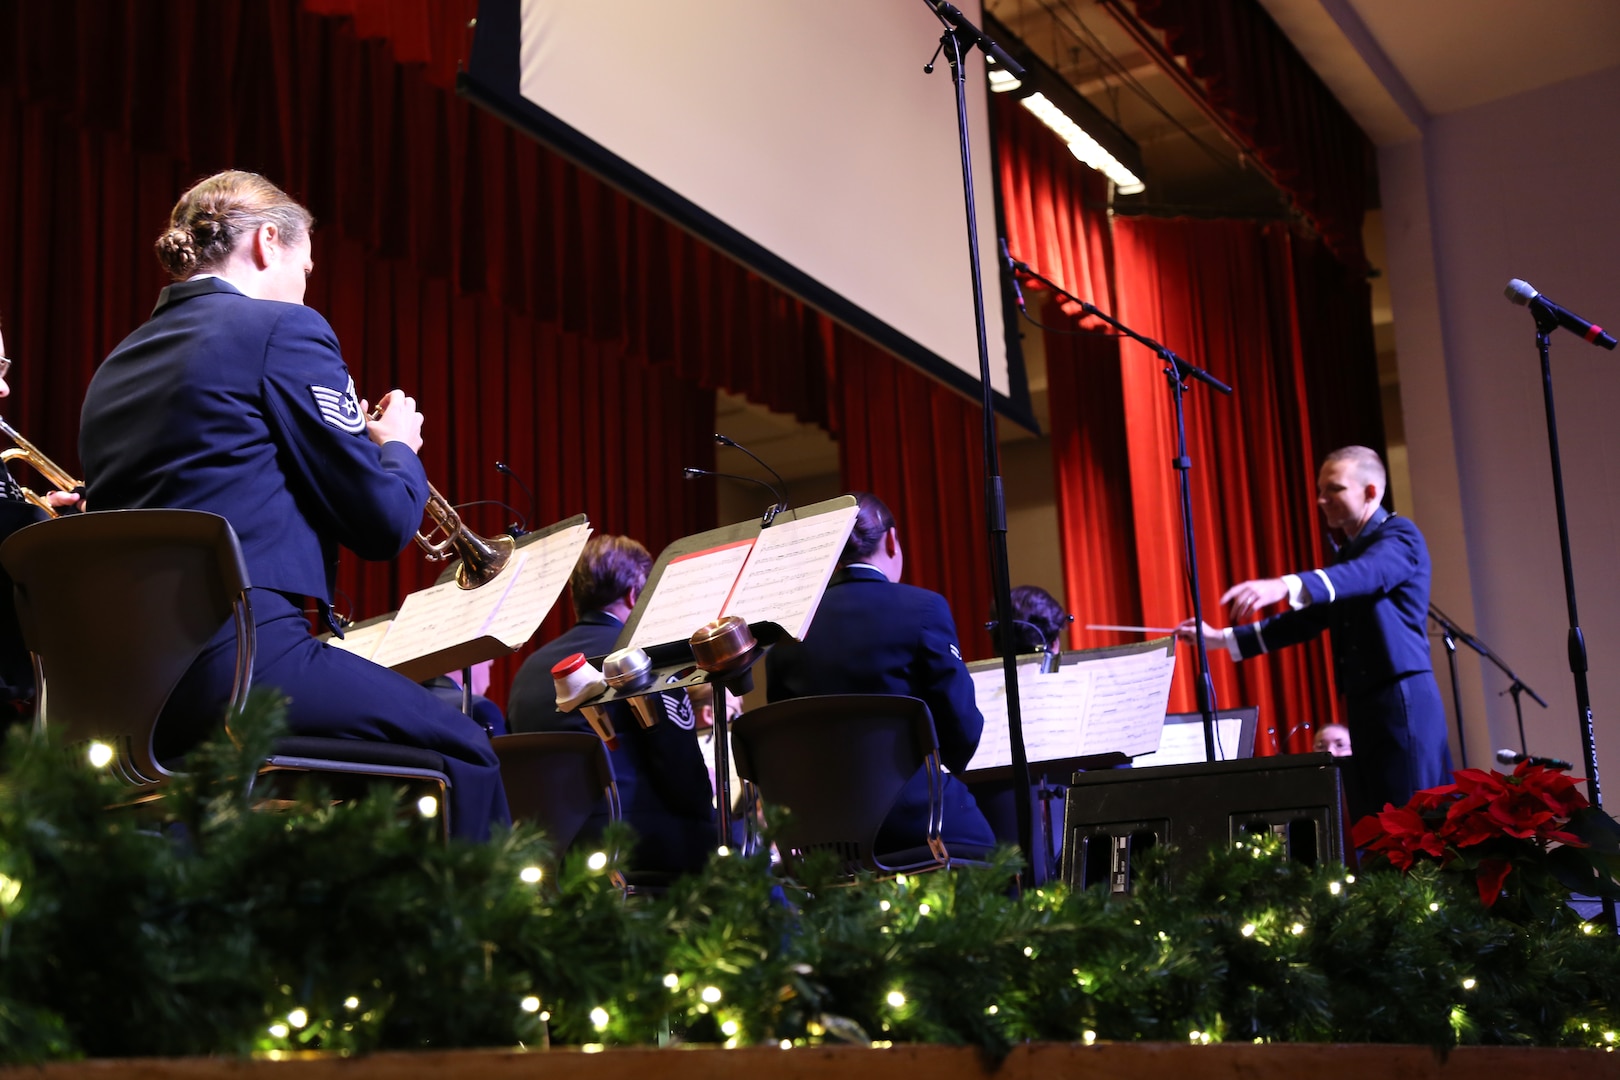 The Air Force Band of the West plays a variety of holiday songs Dec. 17 at the Joint Base San Antonio-Lackland Bob Hope Theater. (U.S. Air Force photo by Airman 1st Class Lincoln Korver)